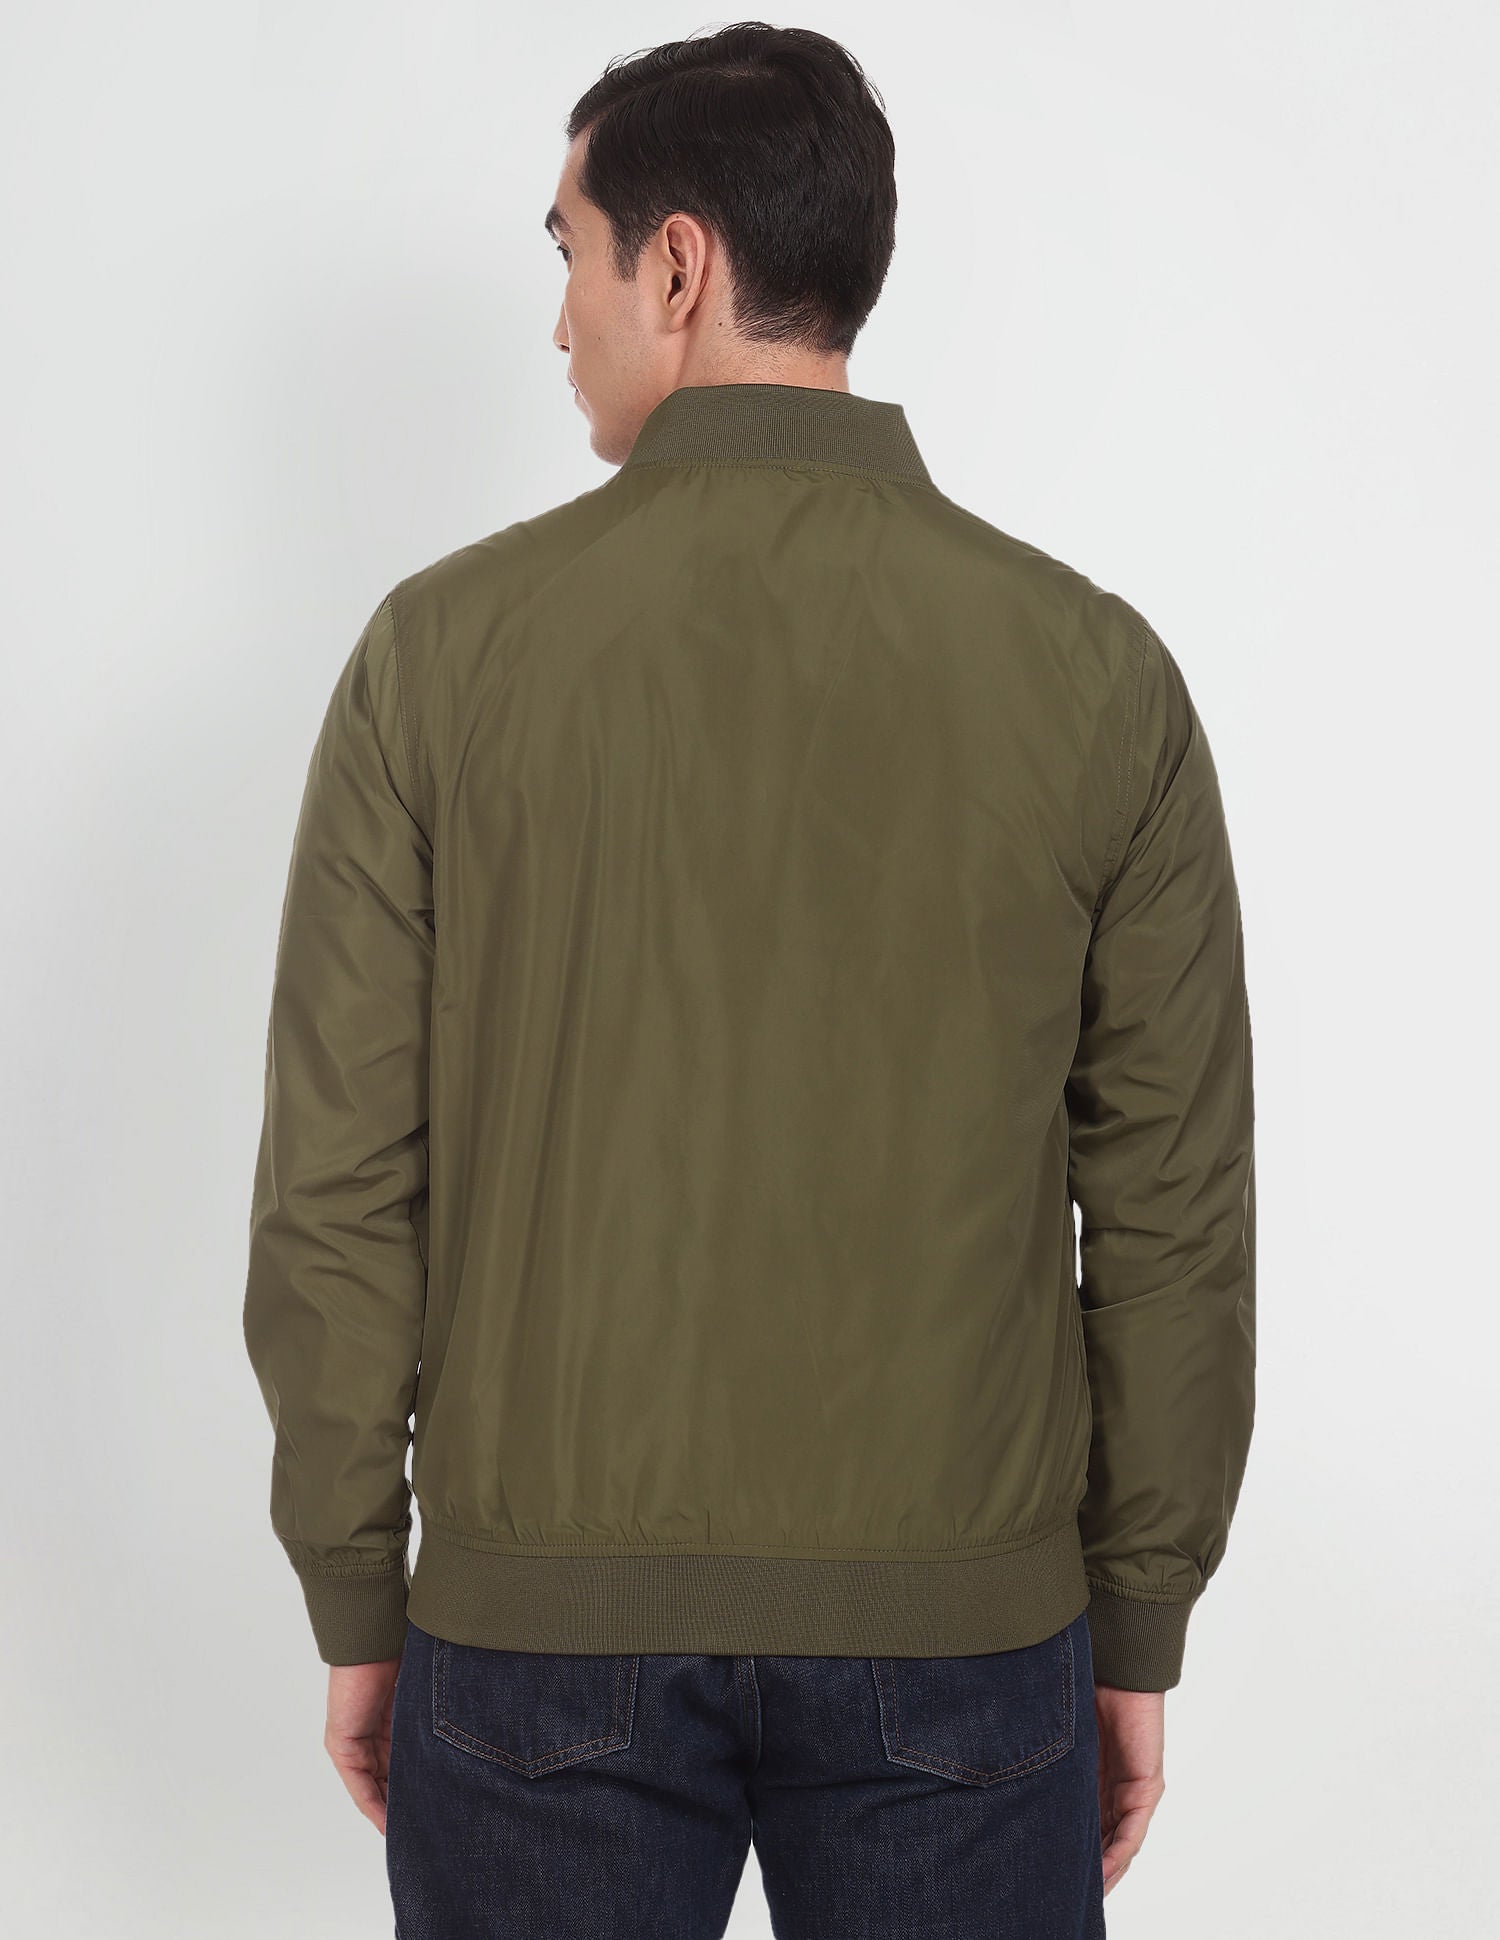 Moncler Etiache Hooded Bomber Jacket Green at CareOfCarl.com